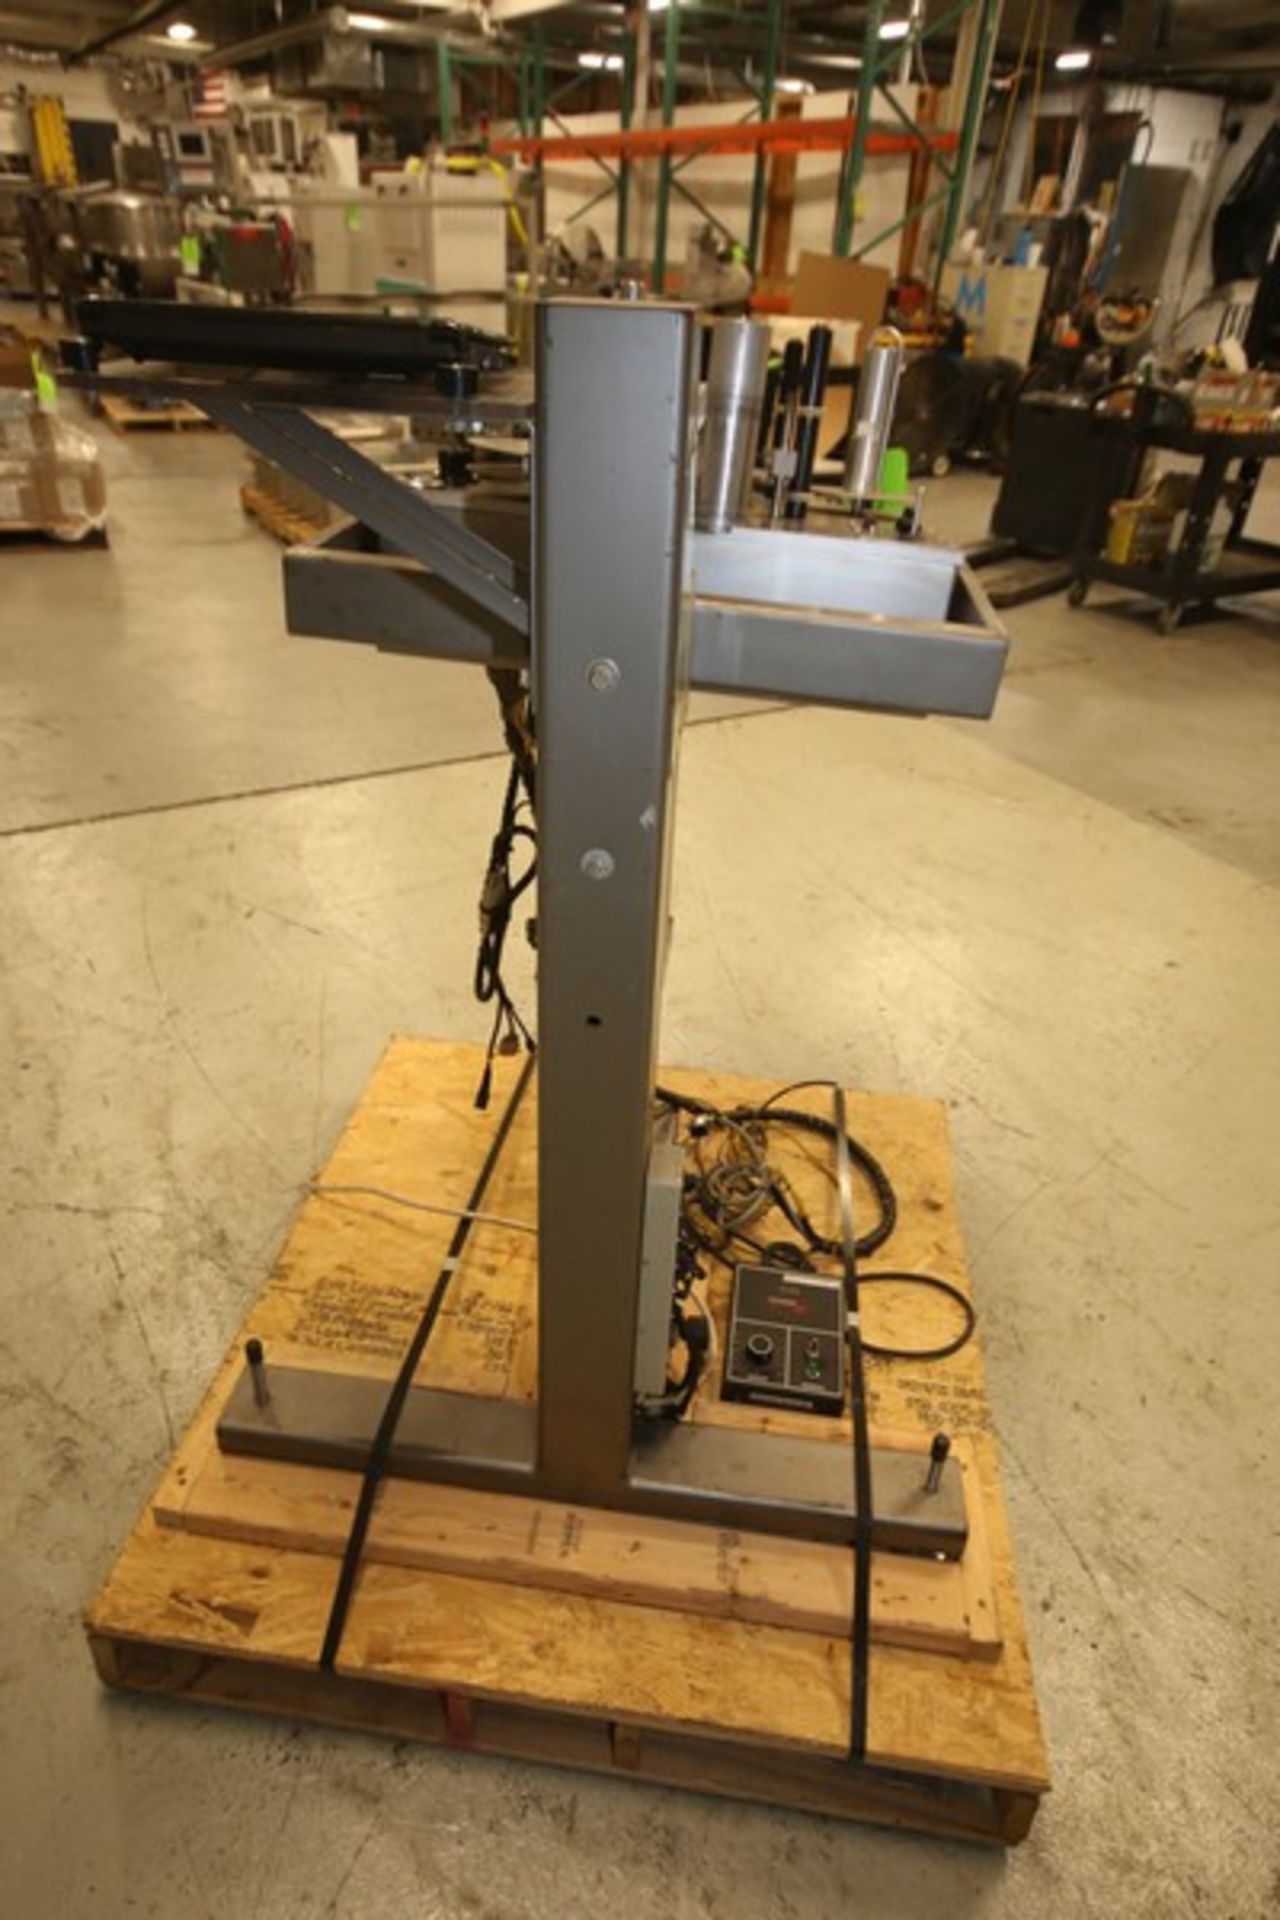 XPak Roll Fed Labeler, Model XP-A8200, SN SX052010, 115V, Mounted on Stand with Top Mounted Sato M- - Image 6 of 8